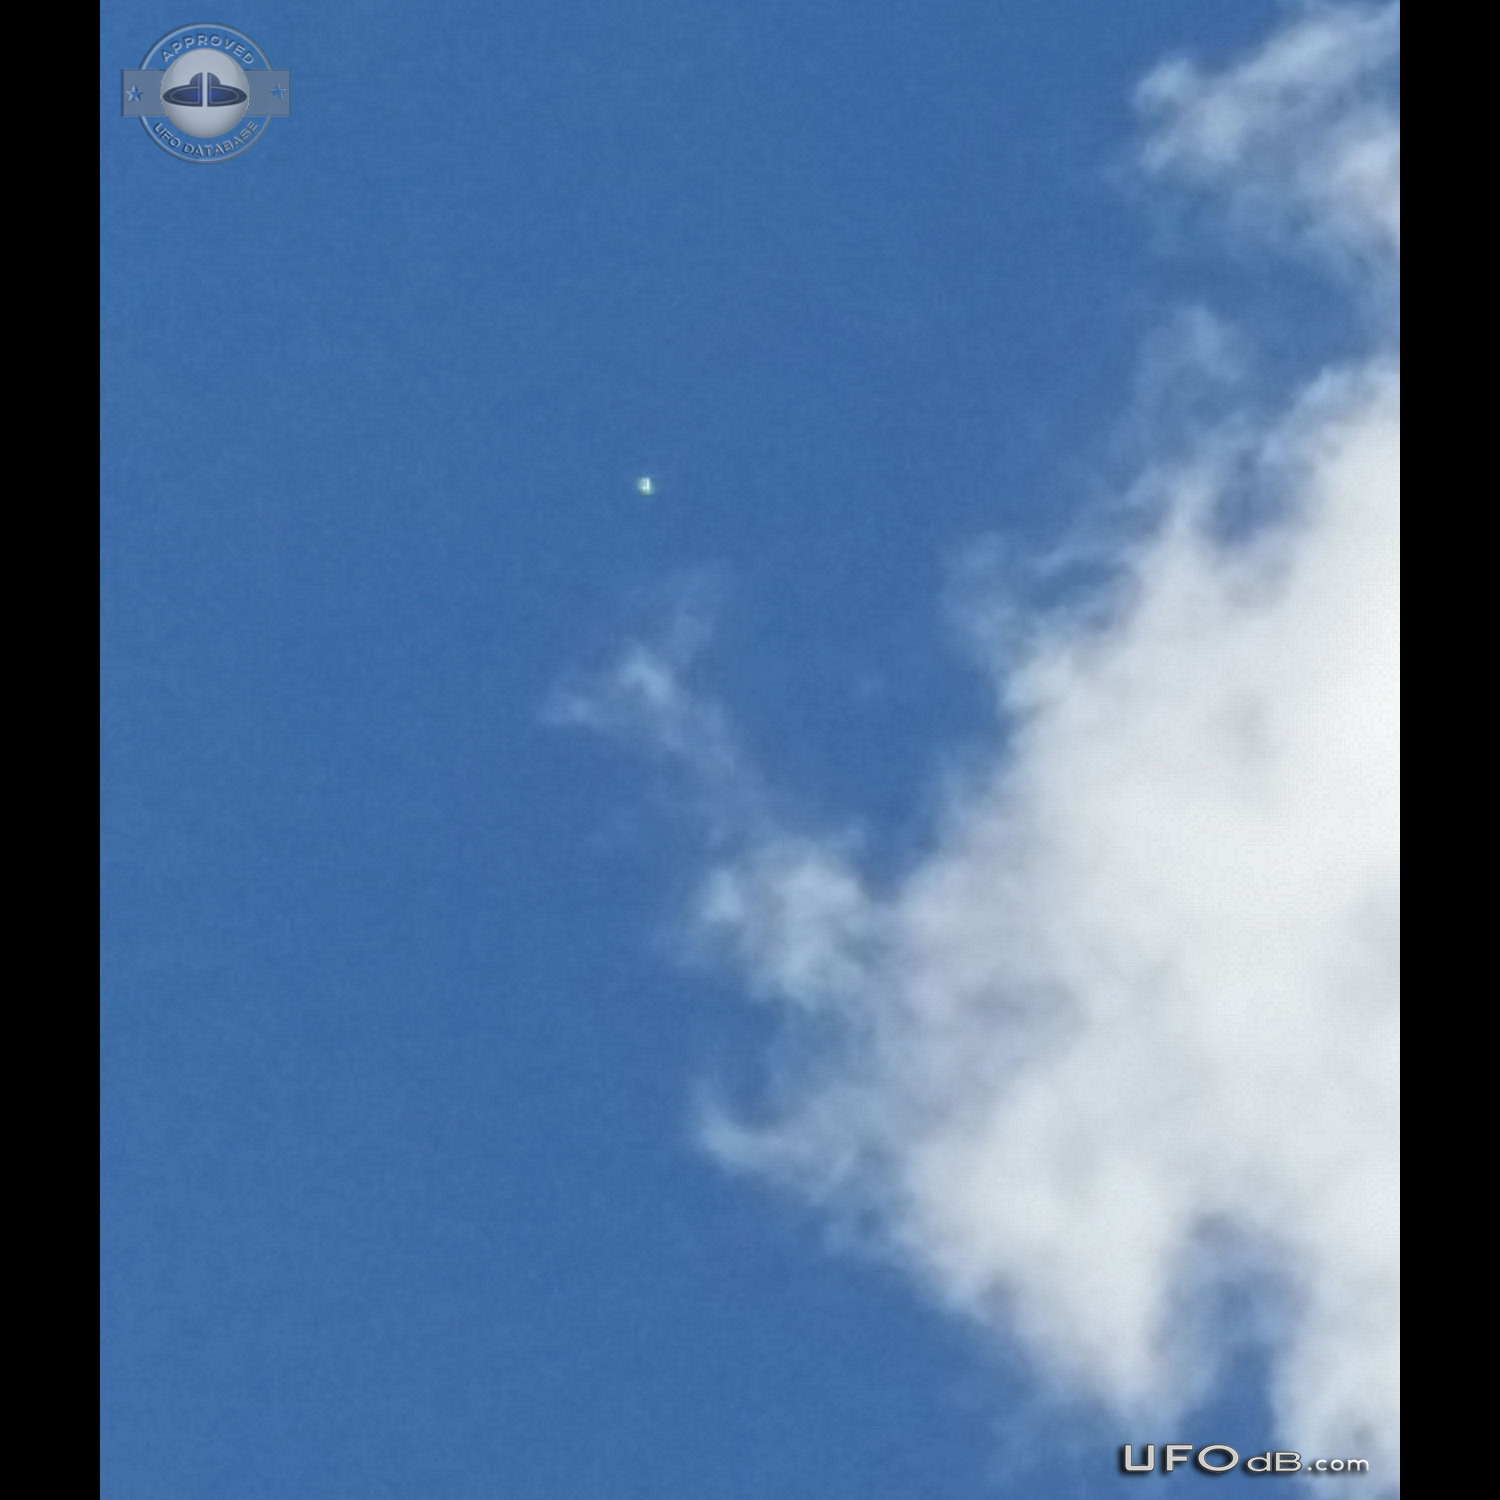 Looked up and saw an bright UFO hovering - Miami Florida USA 2014 UFO Picture #622-3